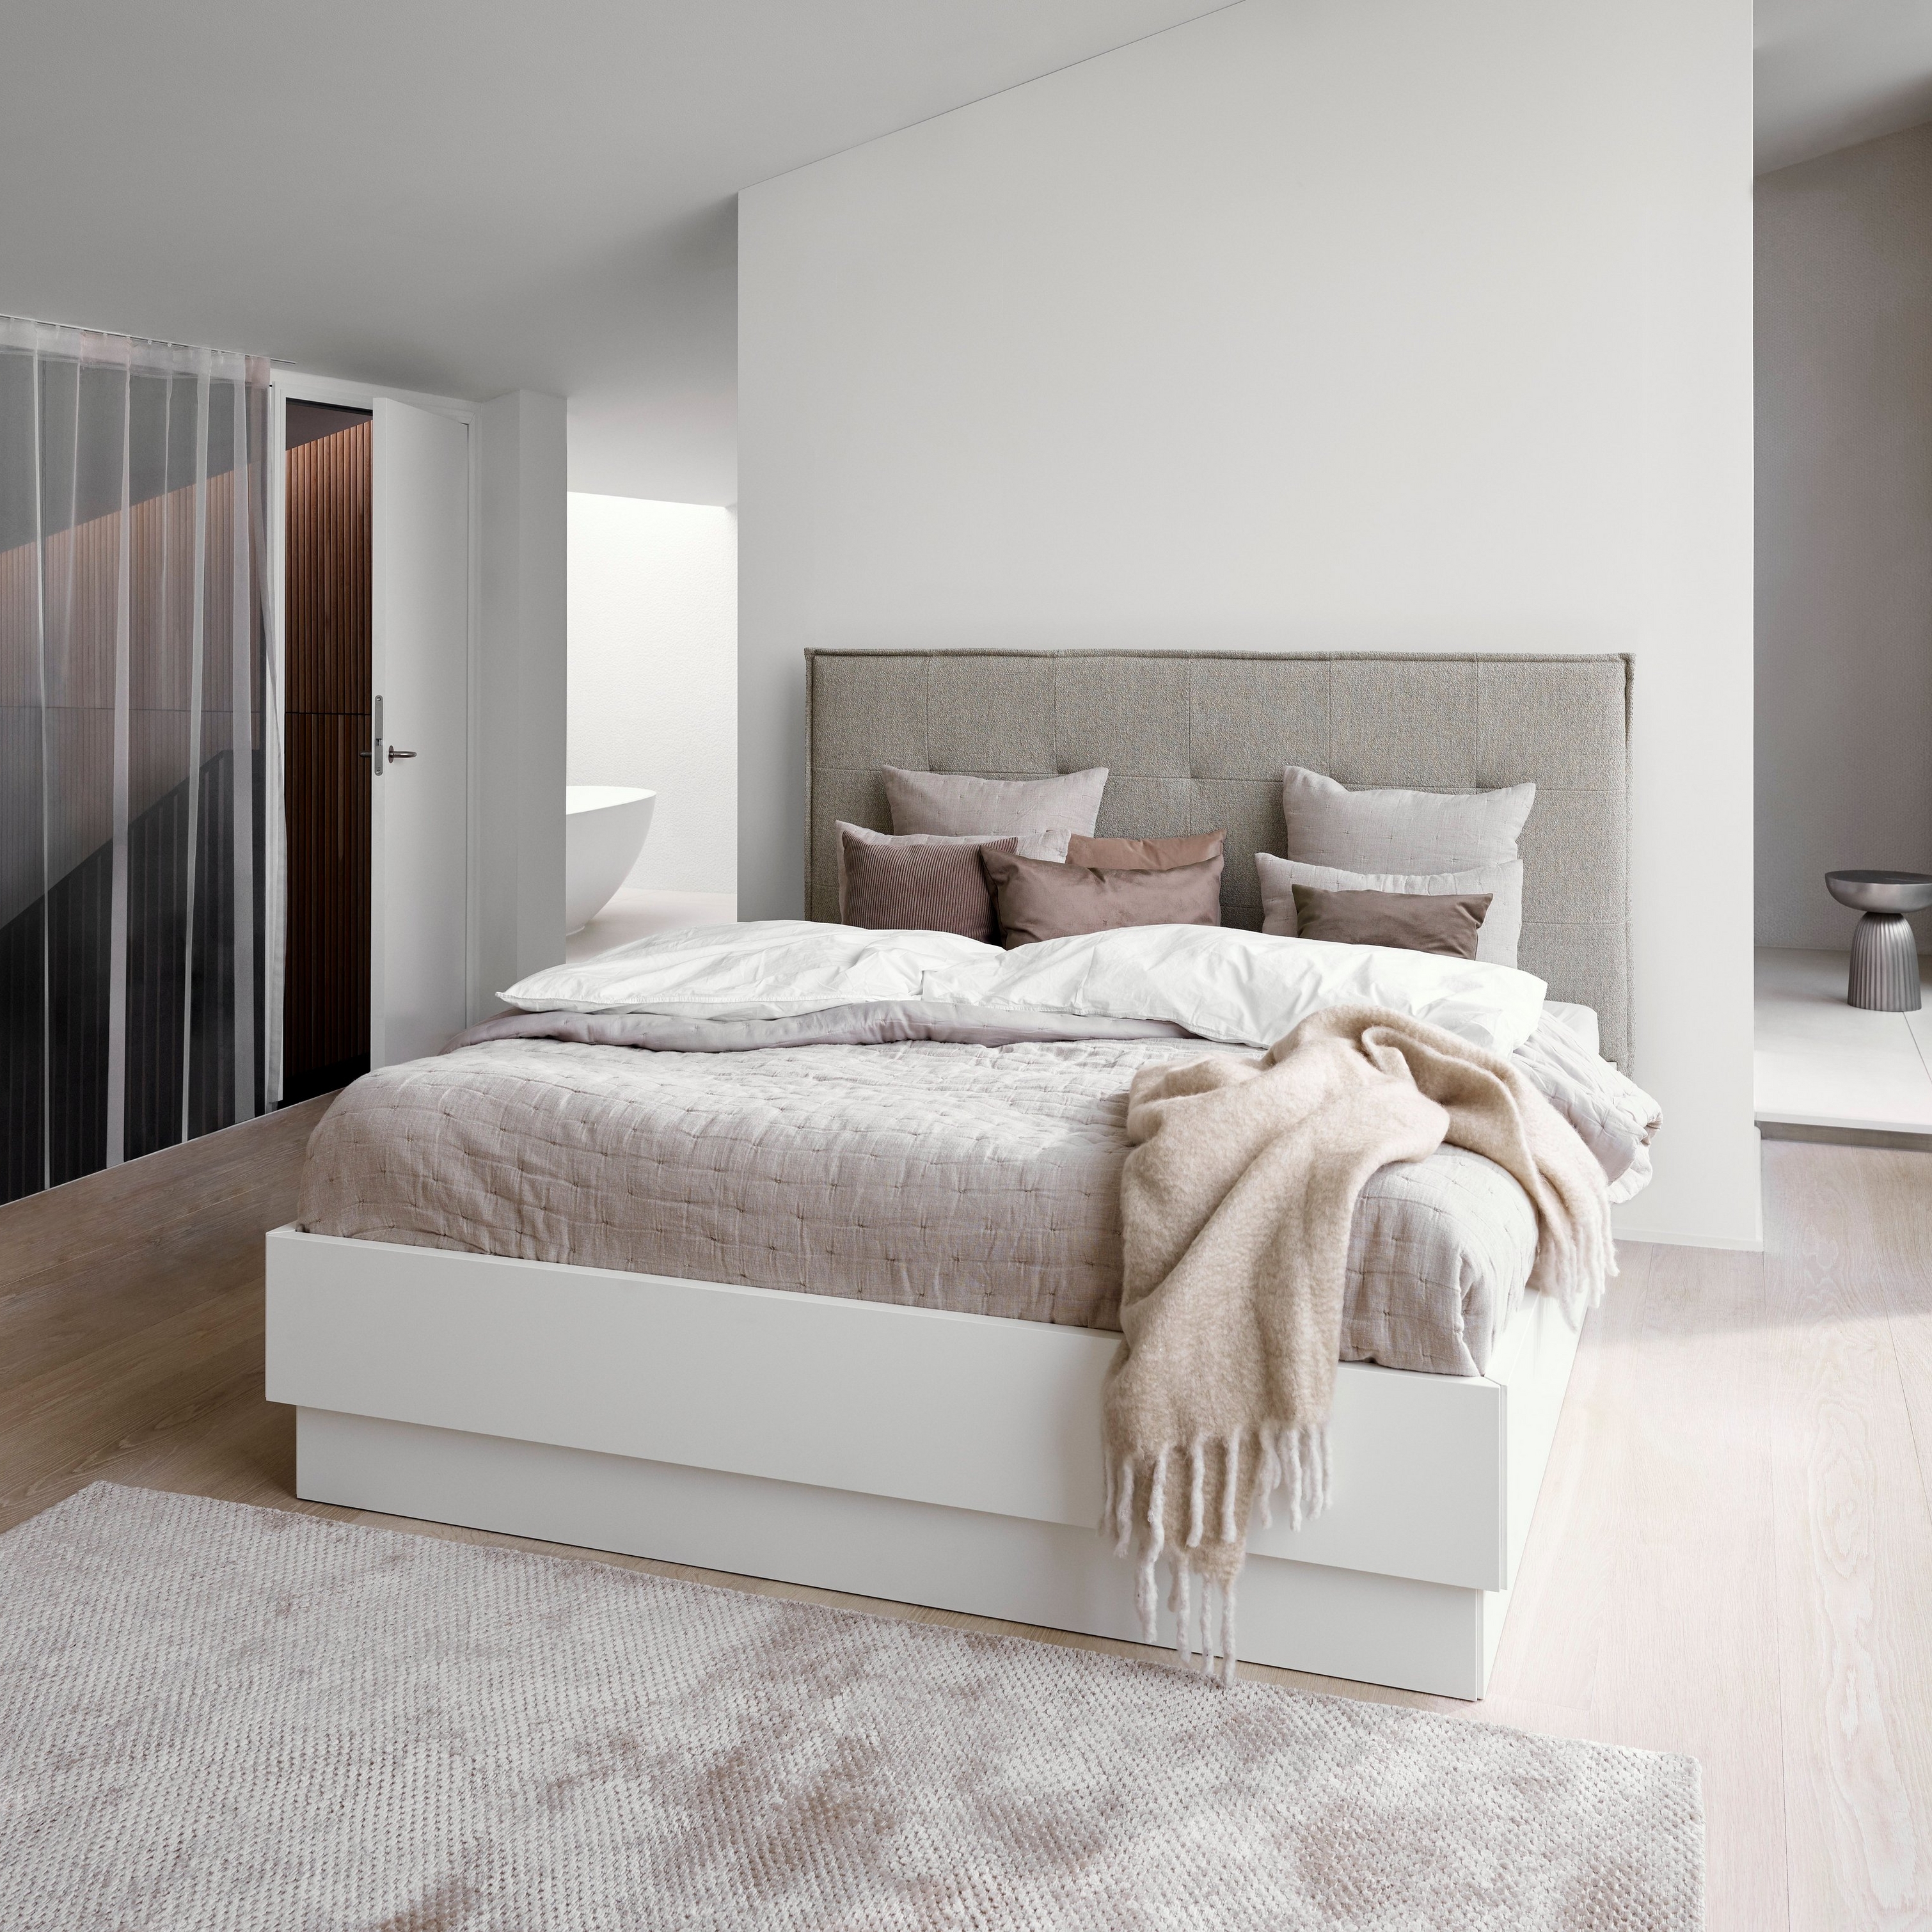 Minimalist bedroom with a grey upholstered bed, white linens, and a textured beige throw.